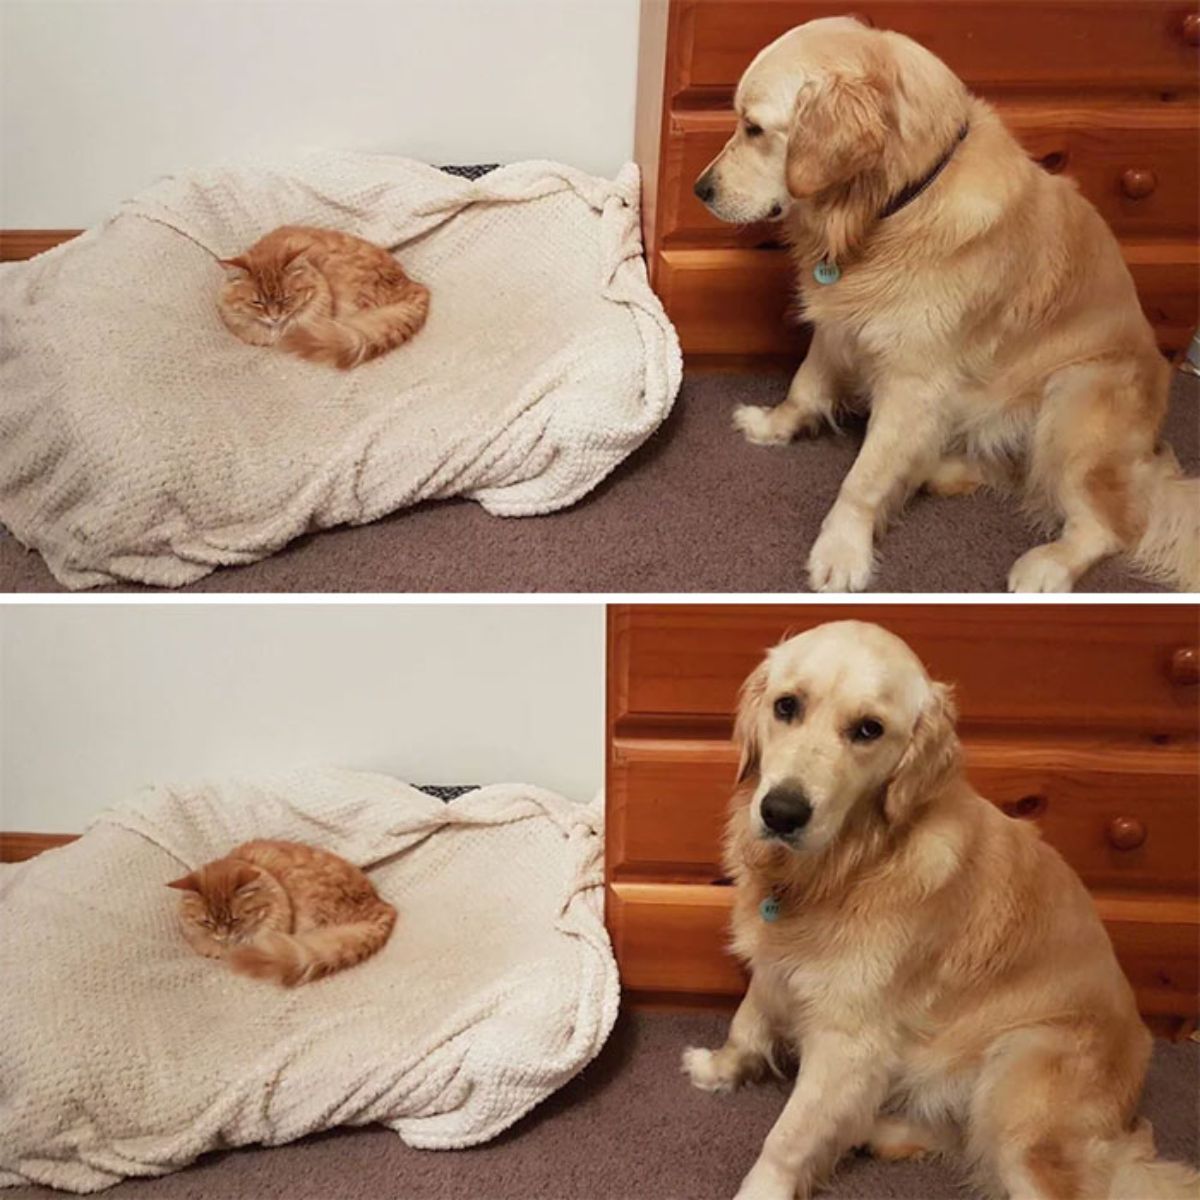 2 photos of an orange cat sleeping on a large white dog bed and a golden retriever watching and looking sad